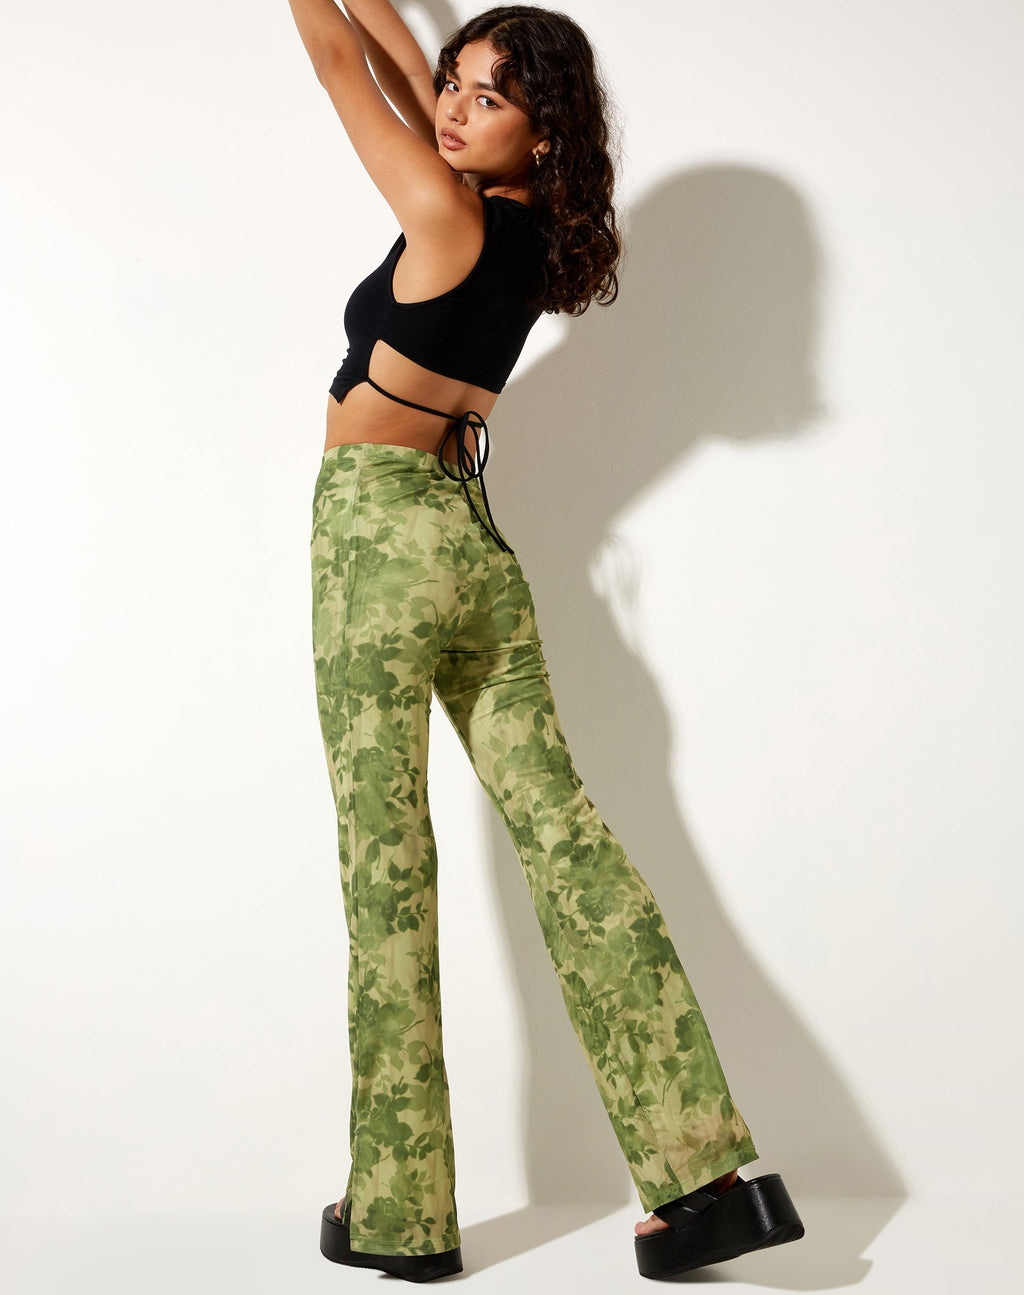 Heny Flare Trouser in Blurred Floral